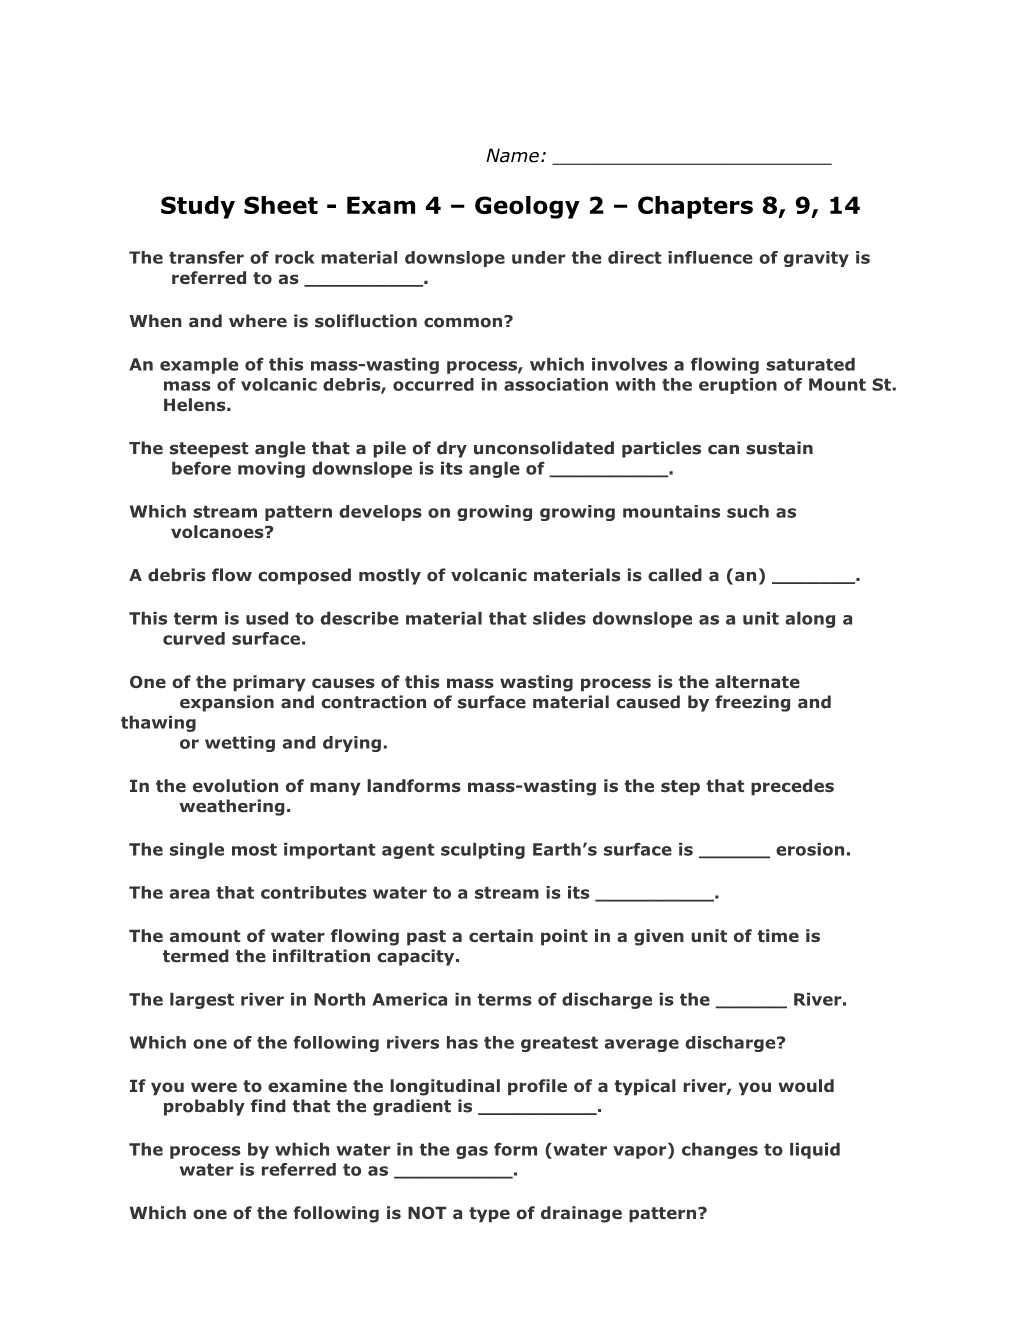 Study Sheet - Exam 4 Geology 2 Chapters 8, 9, 14